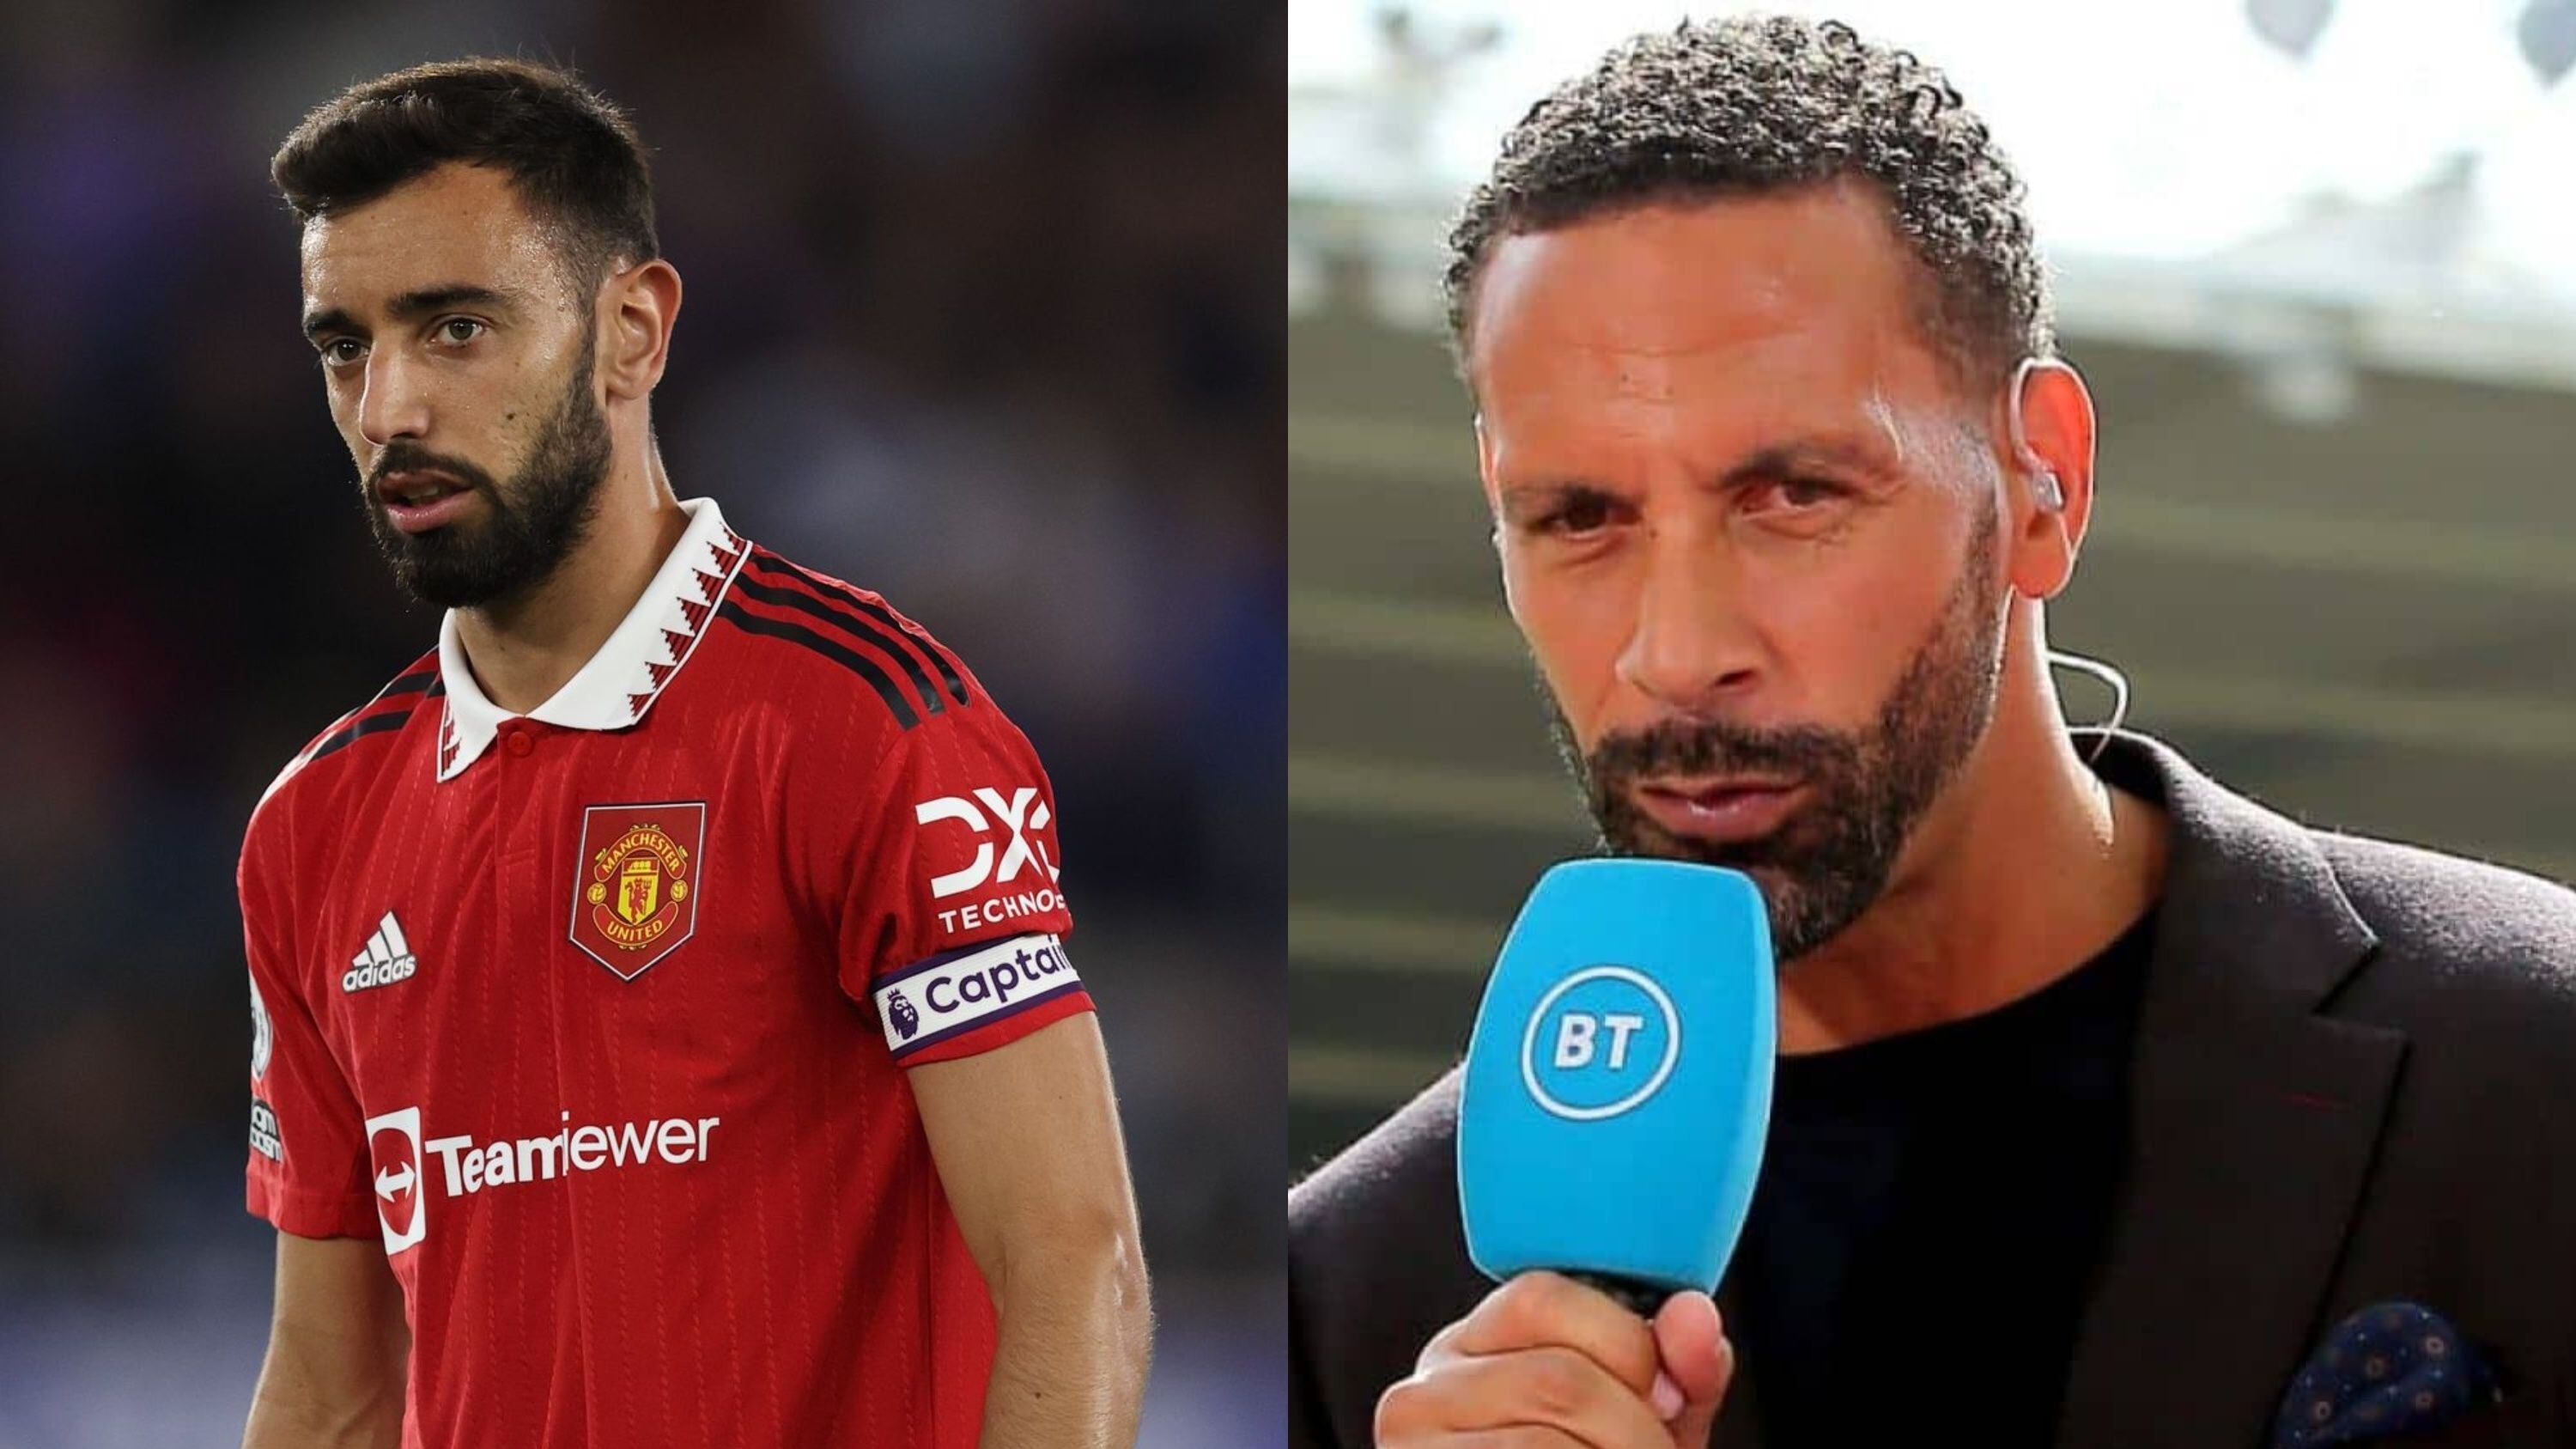 After seeing him as Manchester United captain, this is what Rio Ferdinand has to say about Bruno Fernandes